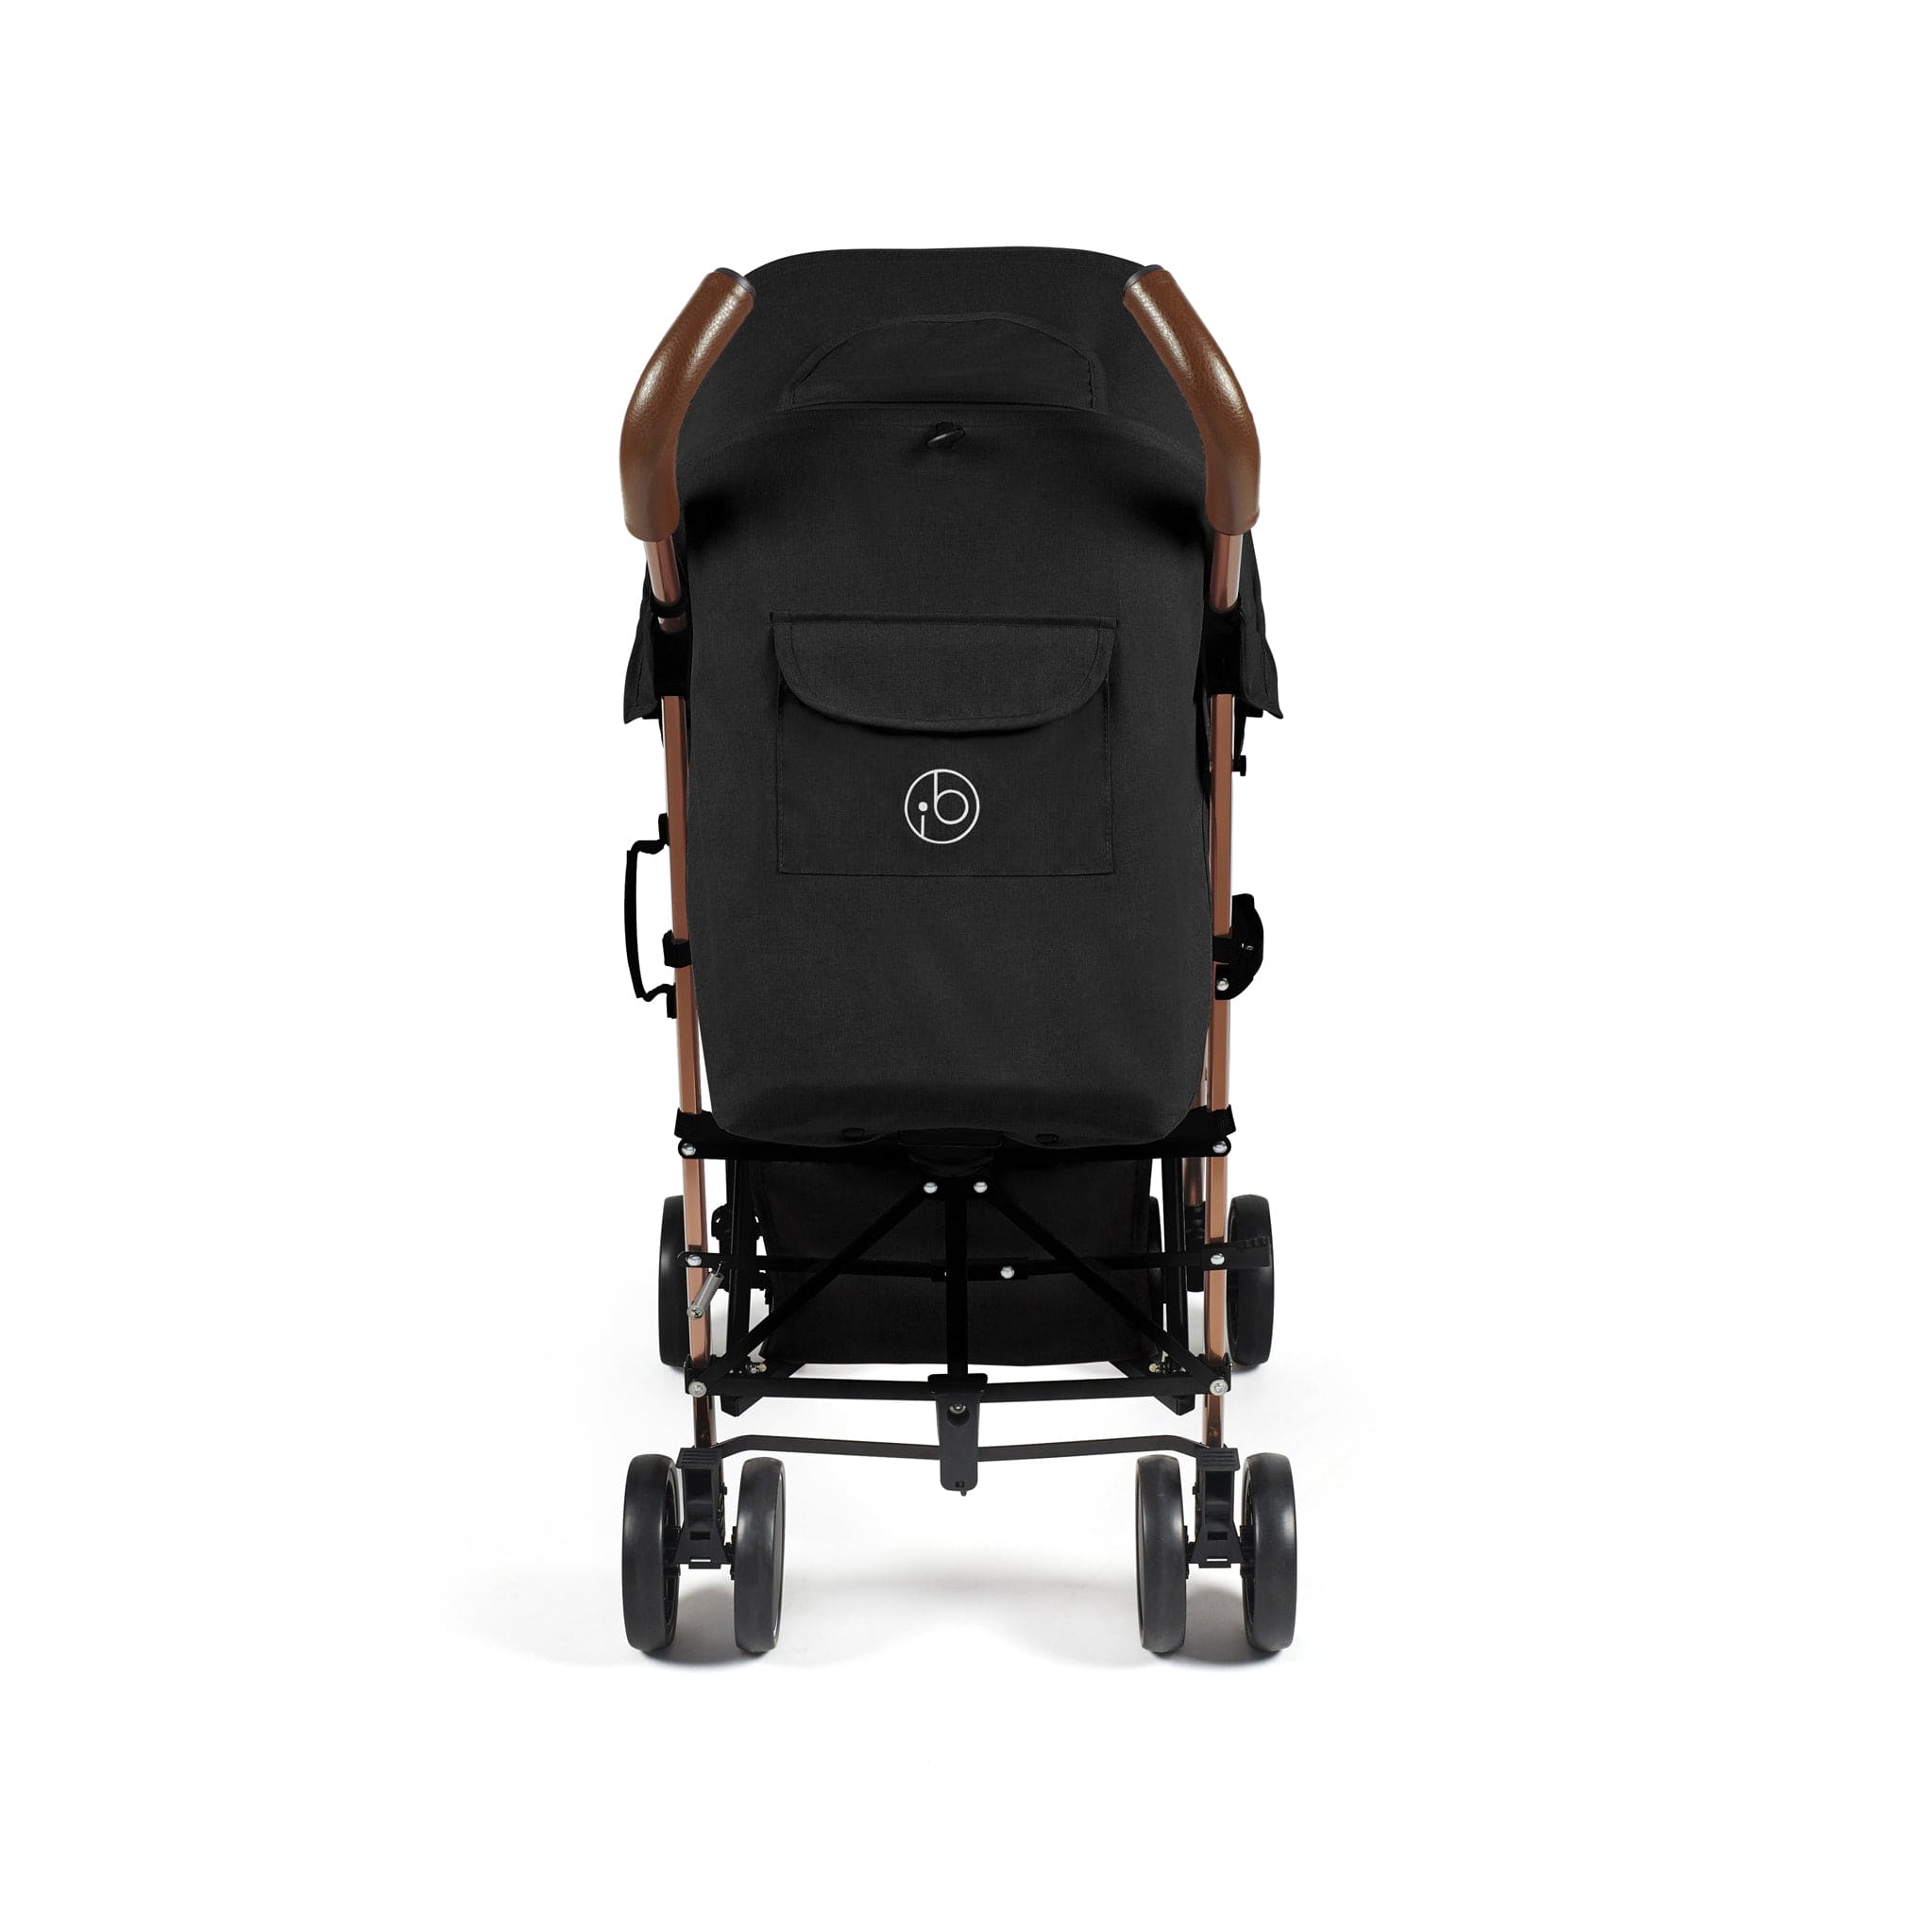 Ickle Bubba baby pushchairs Ickle Bubba Discovery Max Pushchair Rose Gold/Black 15-002-200-043